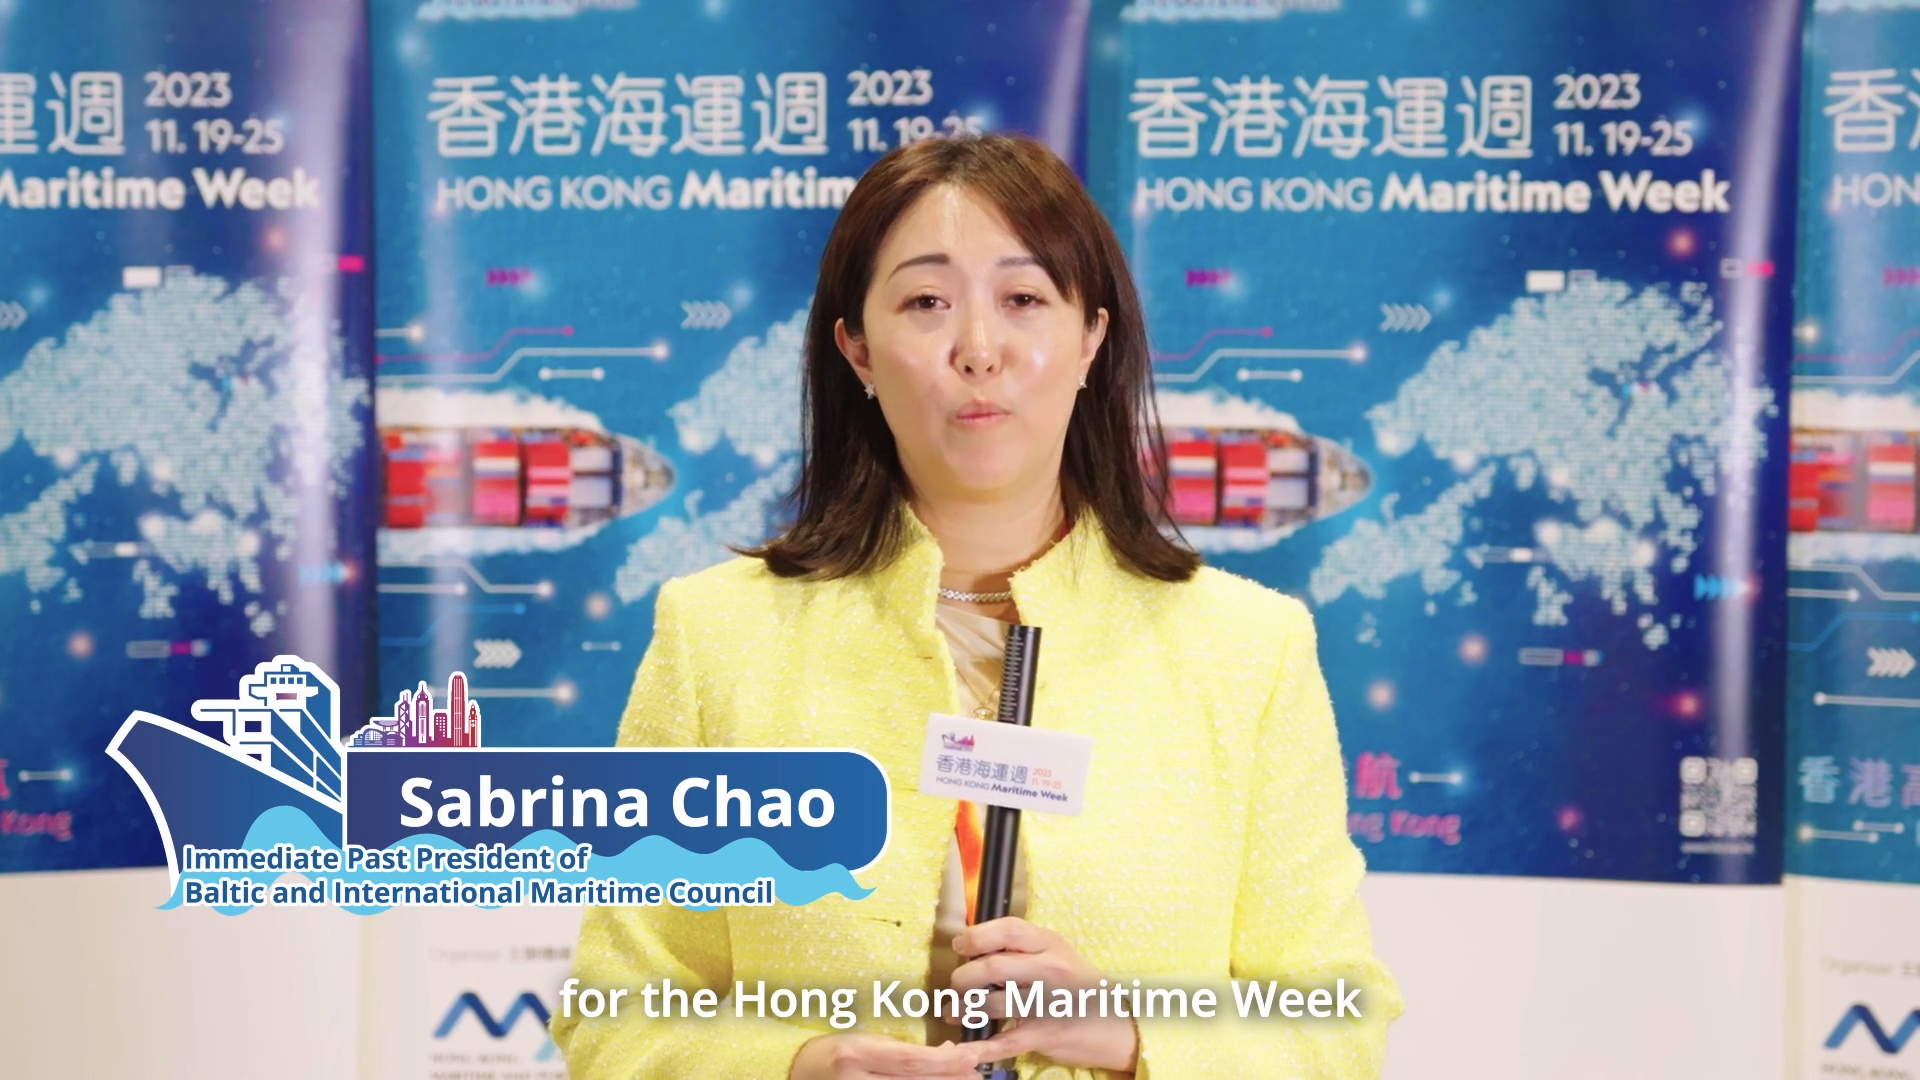 Hong Kong Maritime Week 2023 - Highlights from Ms. Sabrina Chao, Immediate Past President of Baltic and International Maritime Council